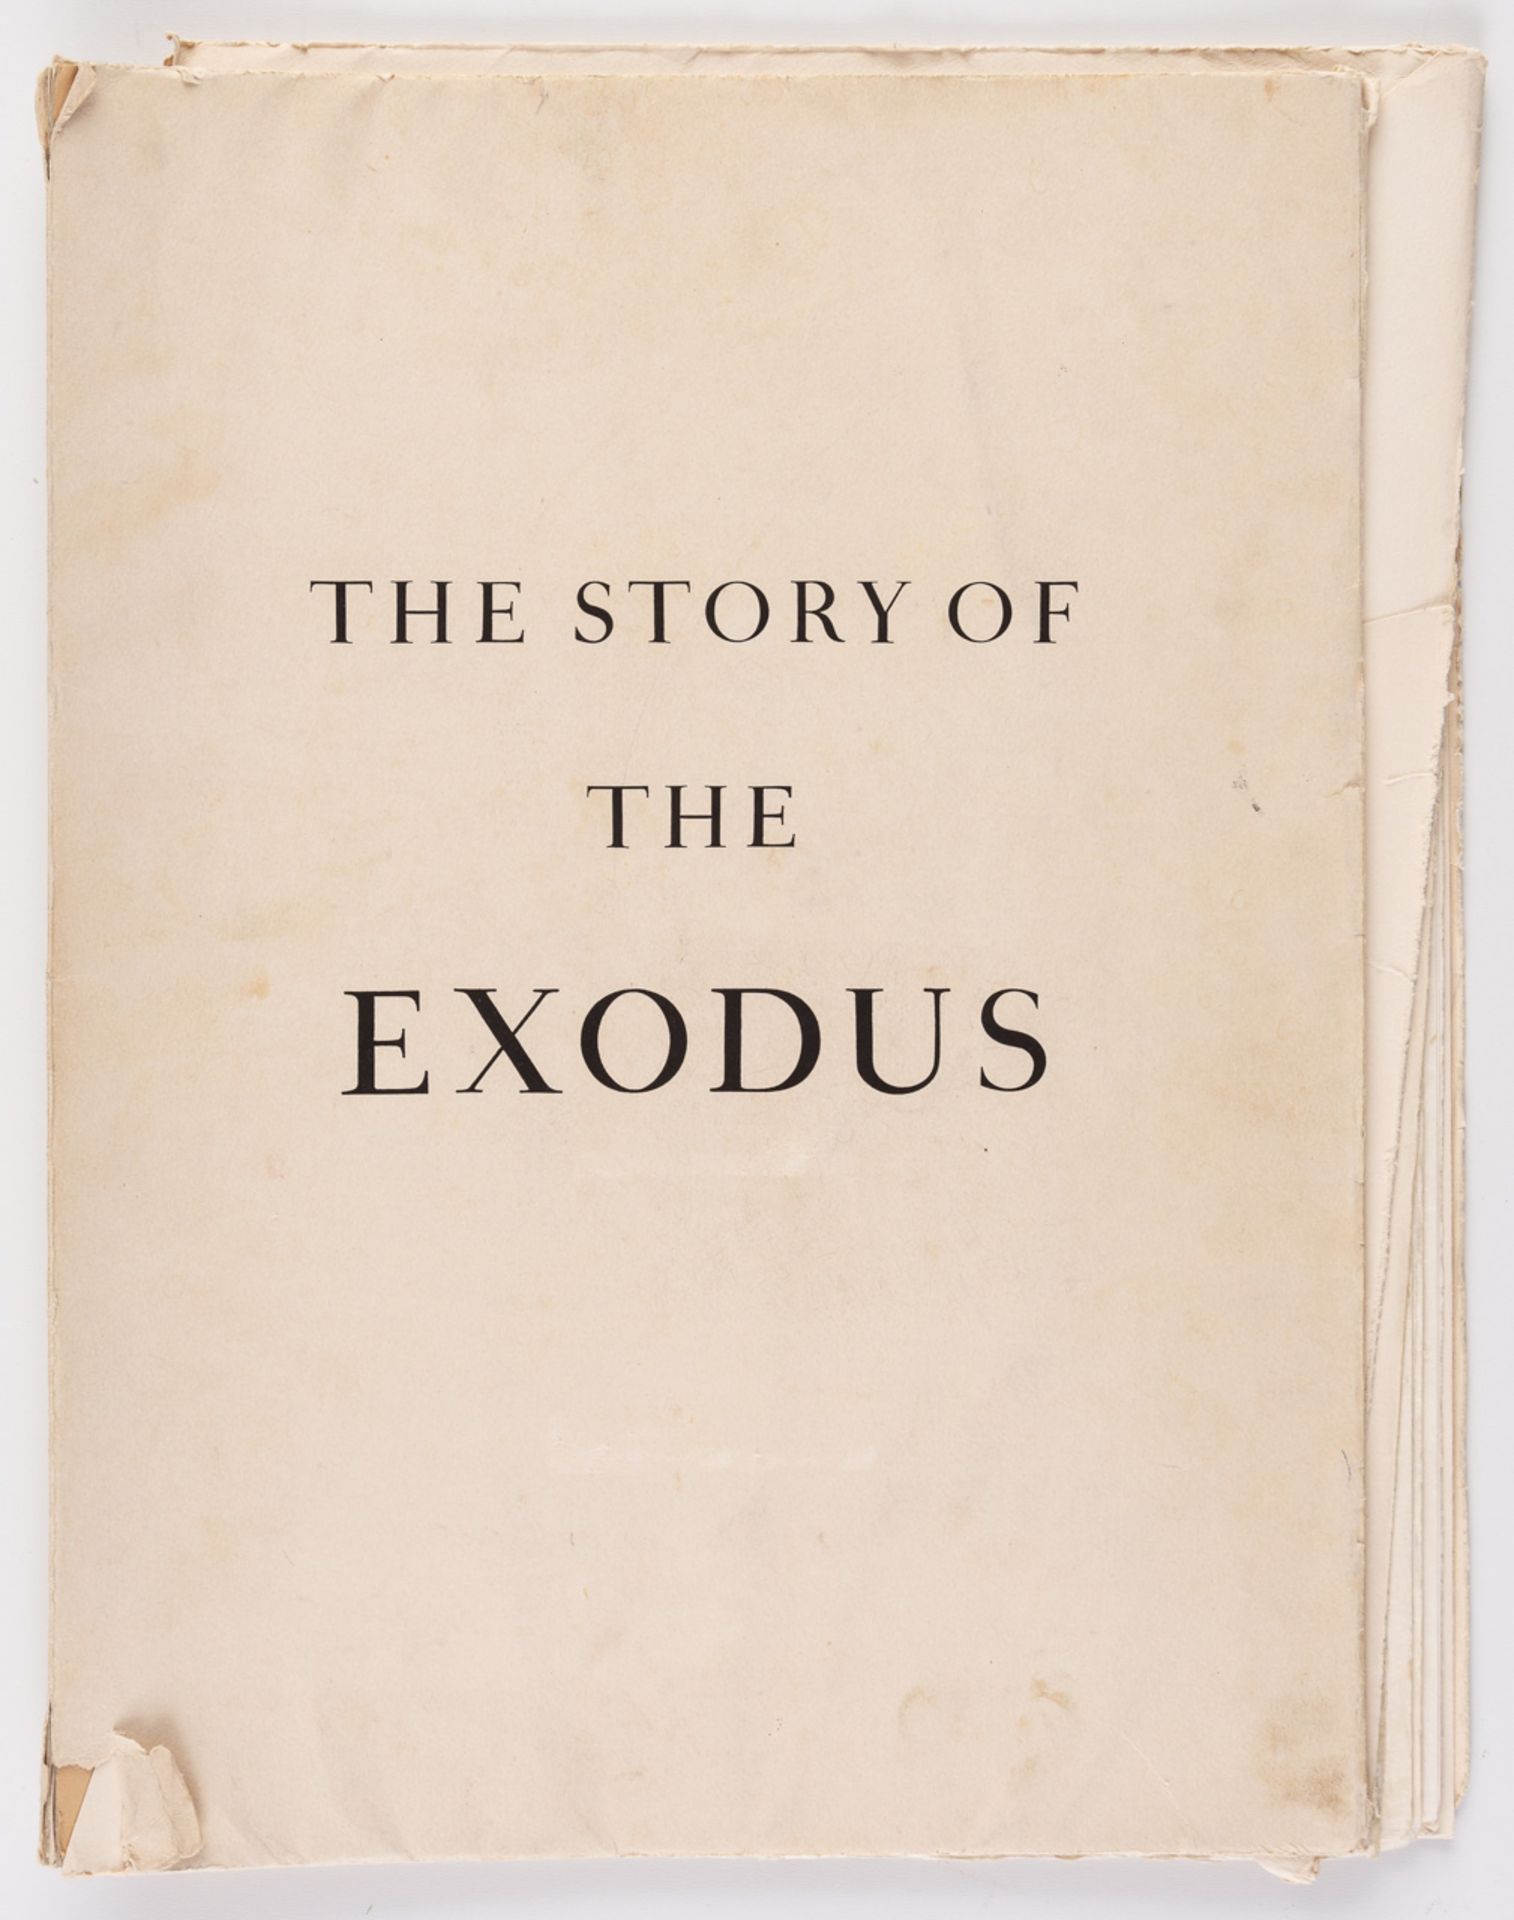 THE STORY OF THE EXODUS - Image 16 of 17